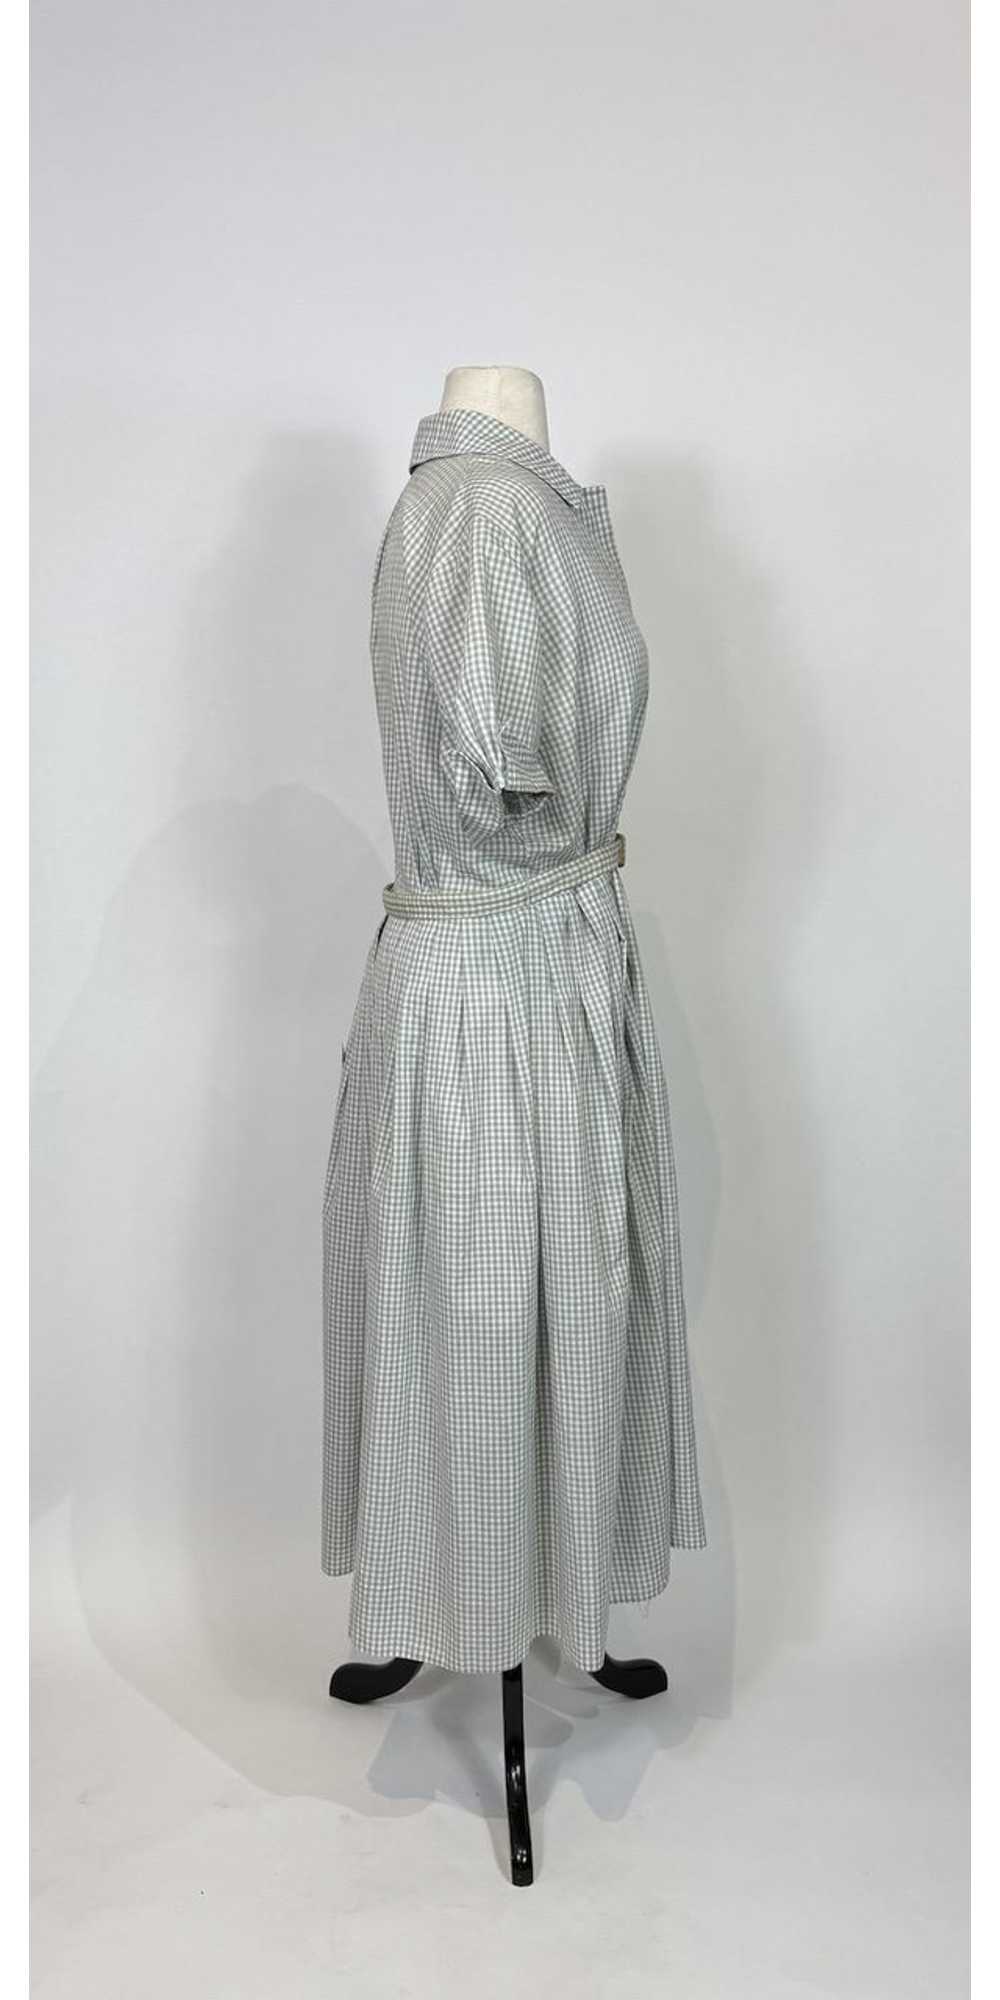 1950s - 1960s George Hess Blue and White Gingham … - image 5